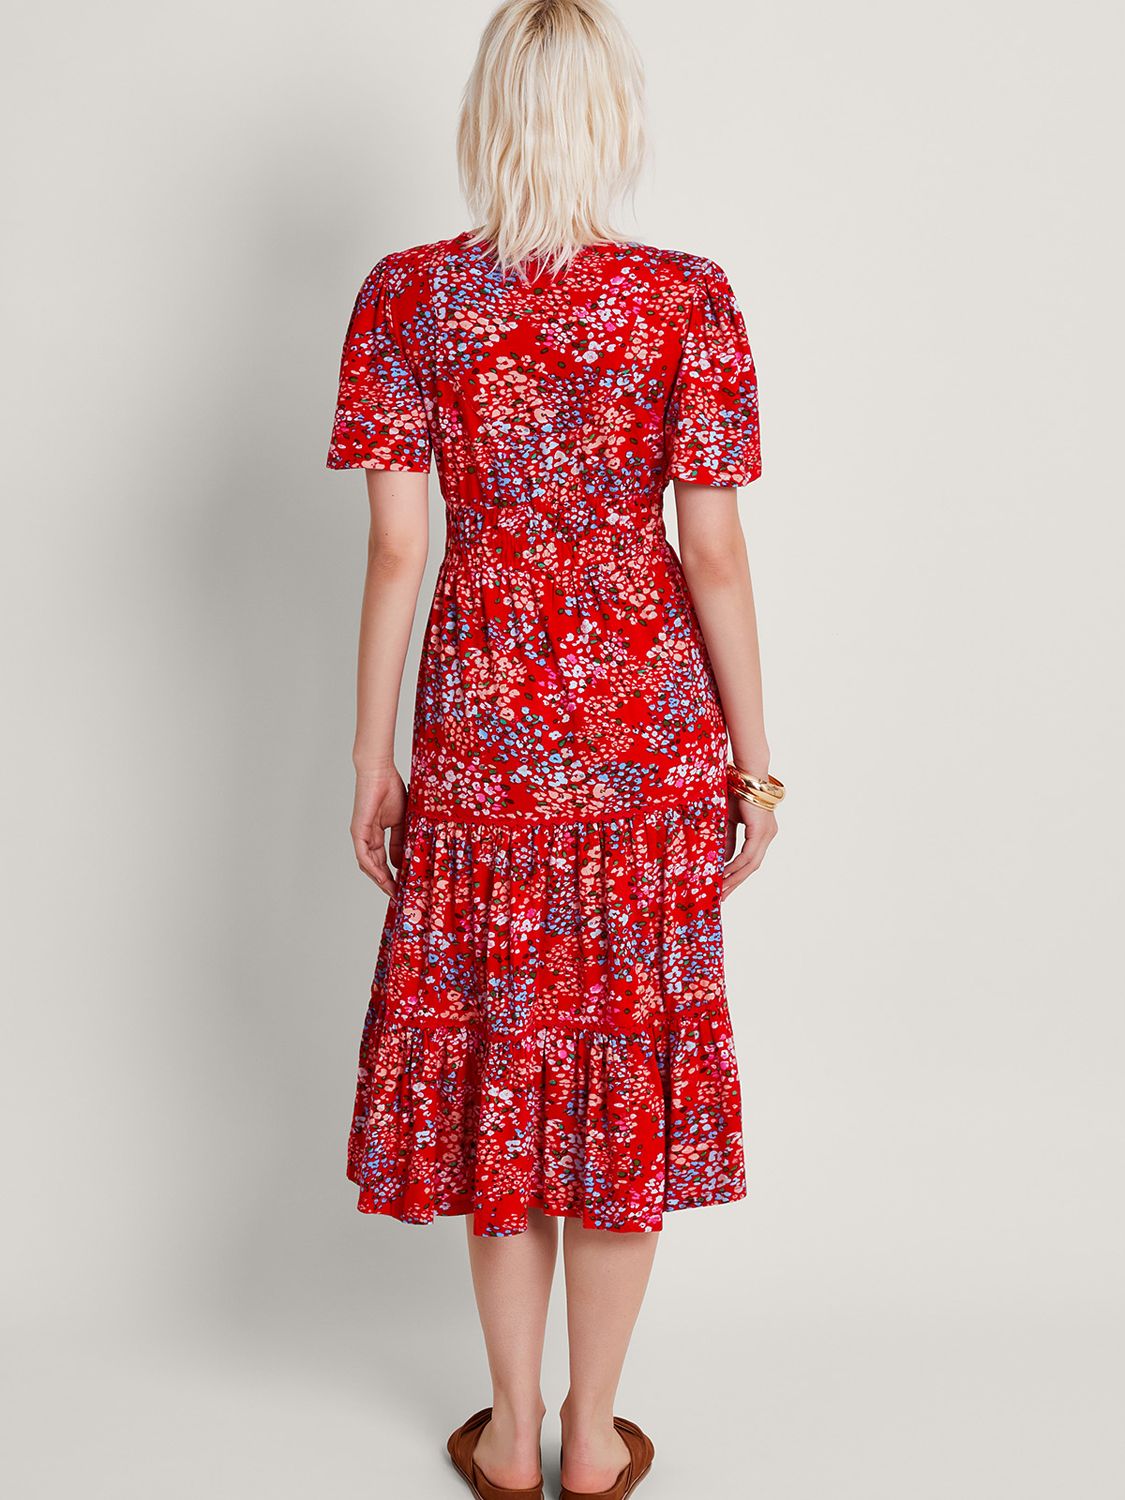 Monsoon Micola Floral Midi Tiered Dress, Red, S